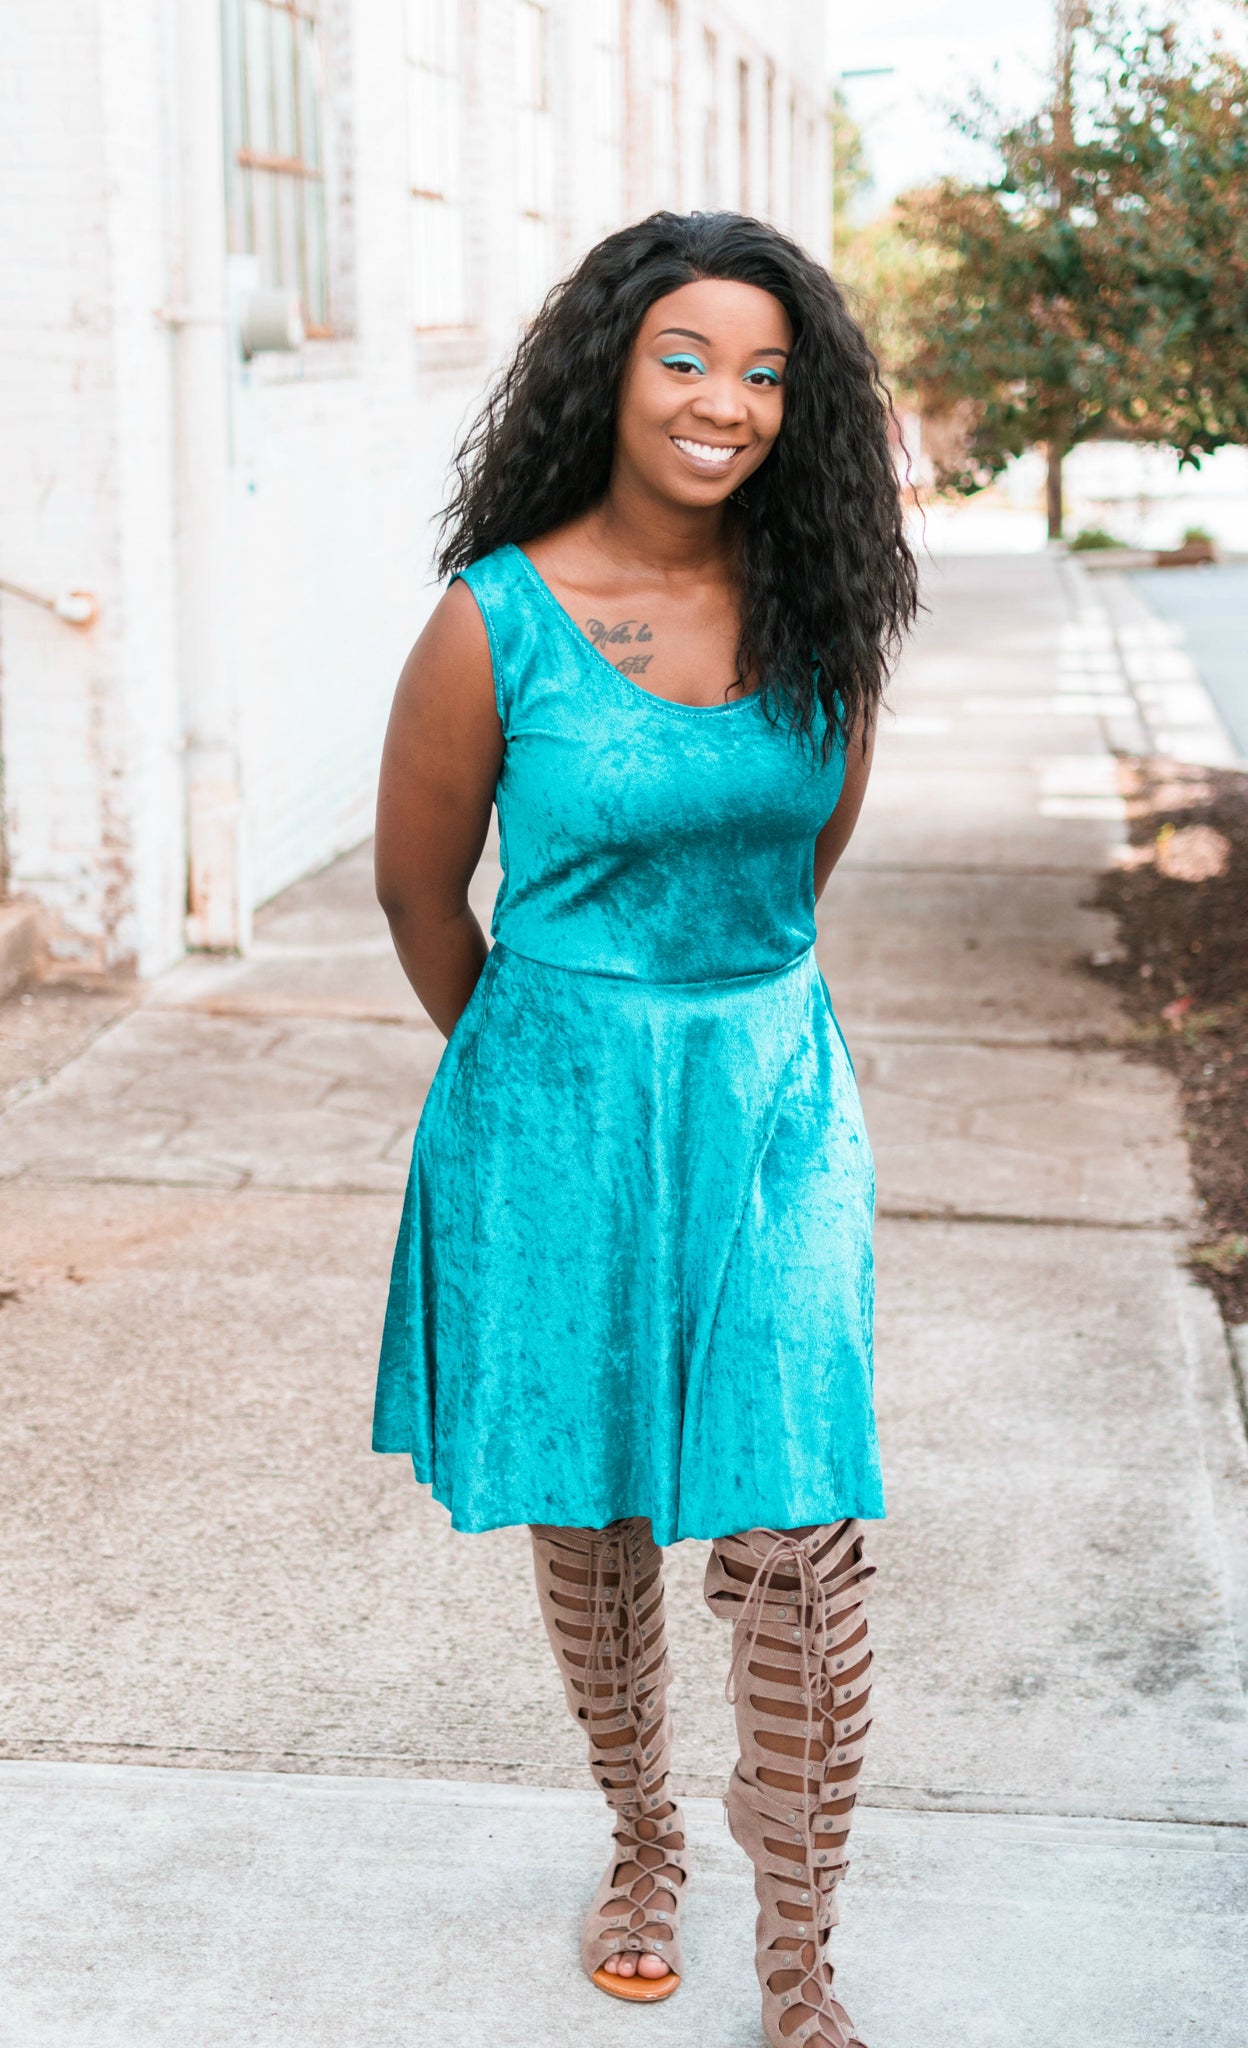 Free sewing patterns for womens dresses - Life Sew Savory